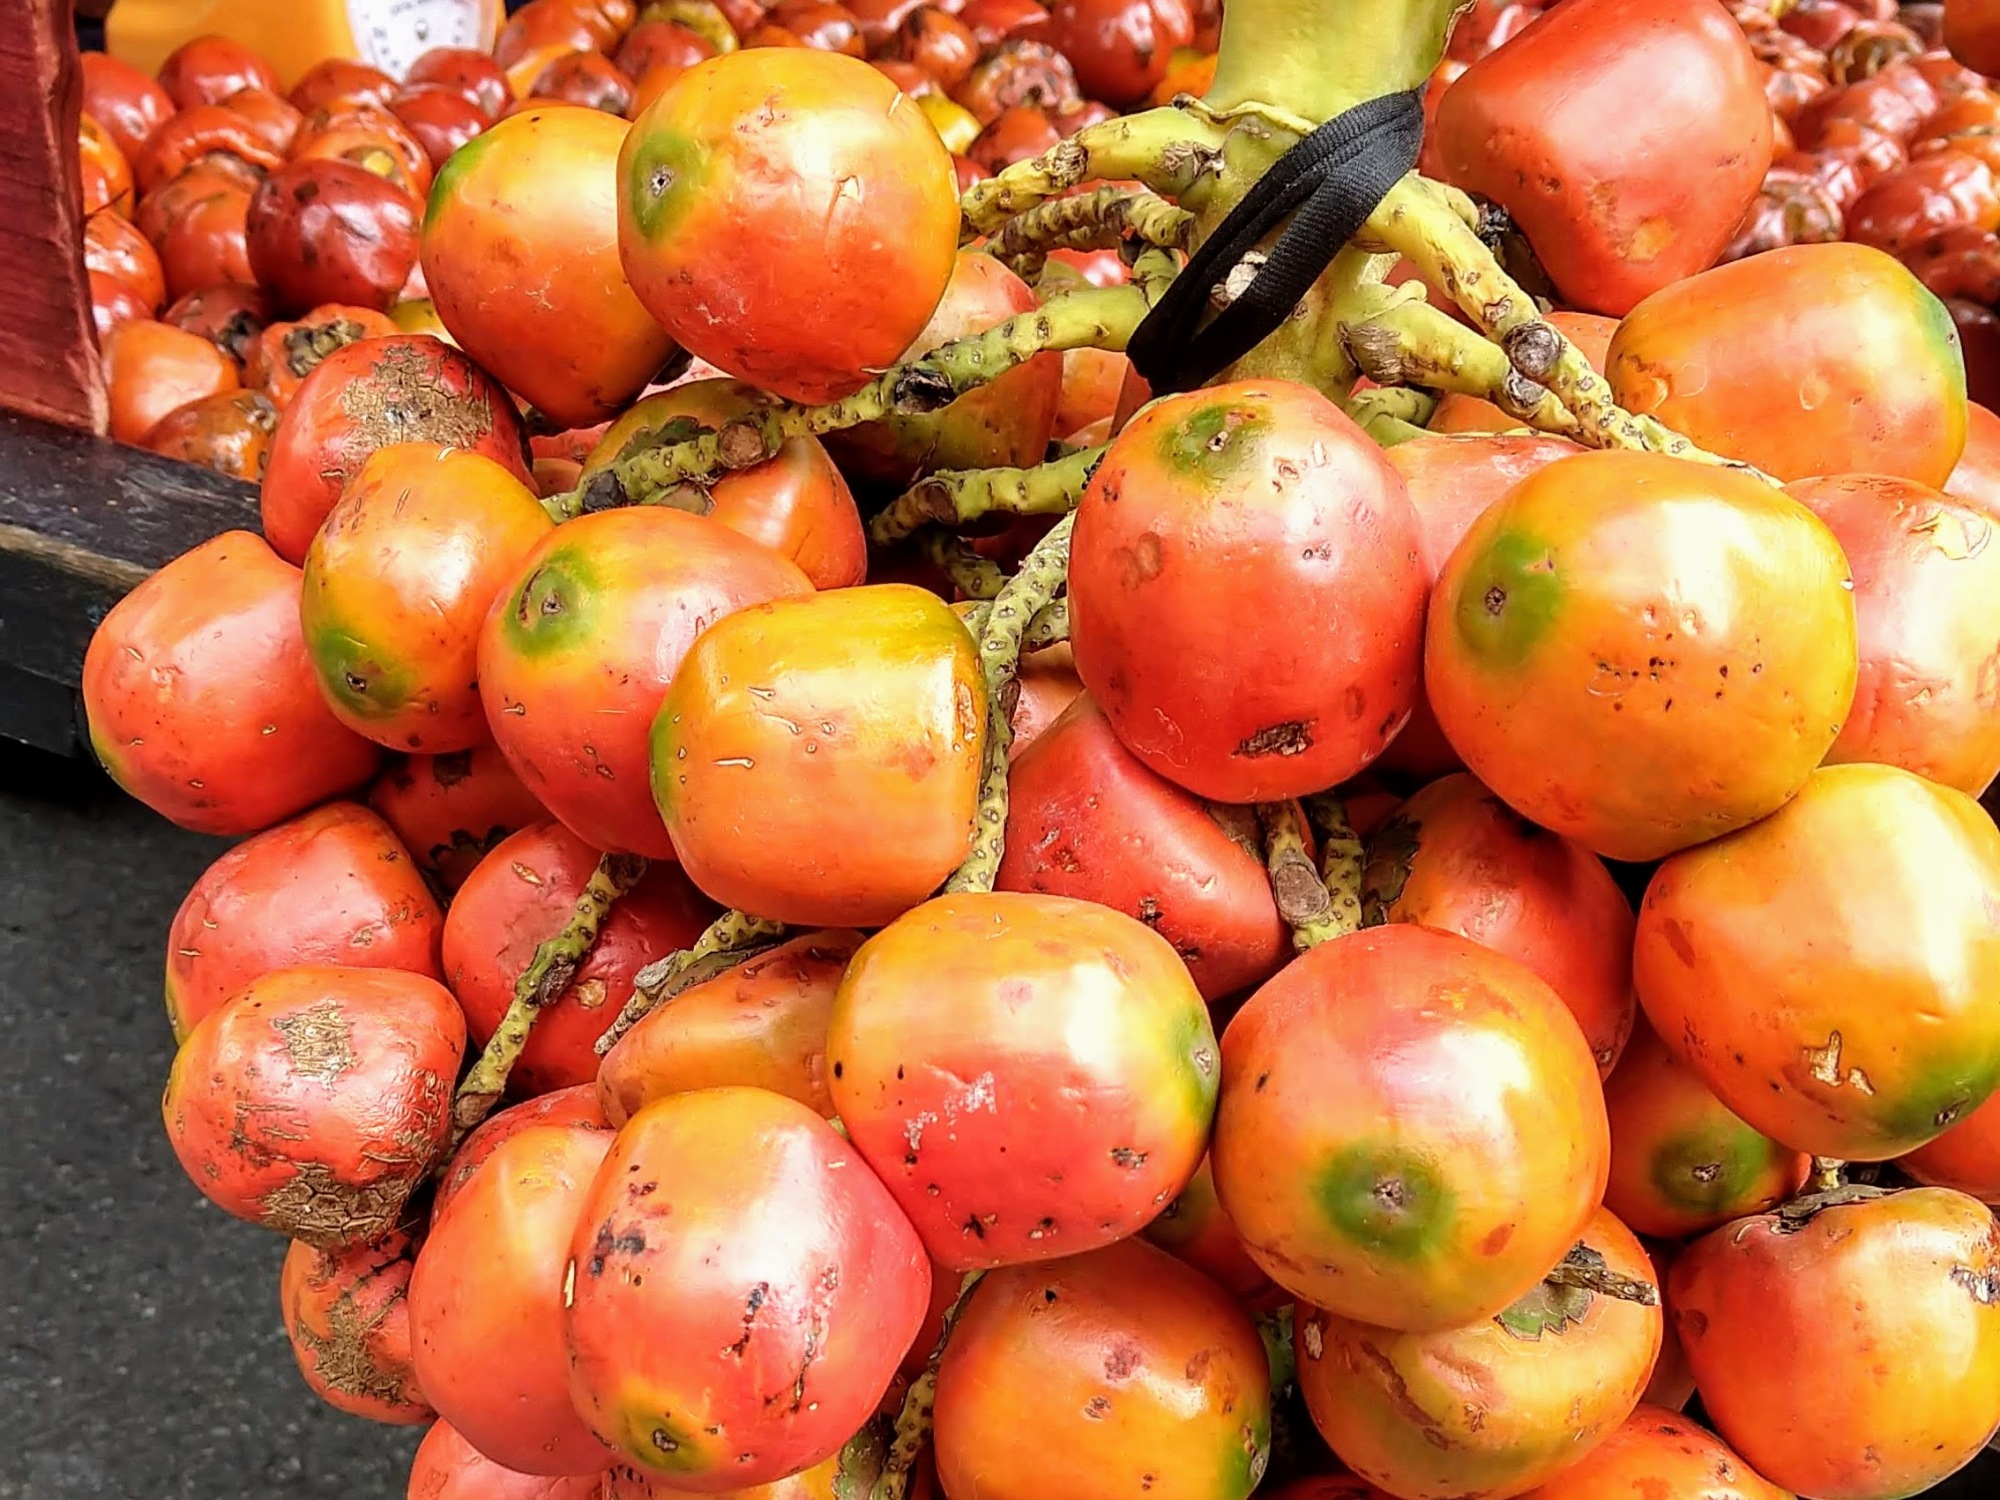 Fruit on a cart in Colombia